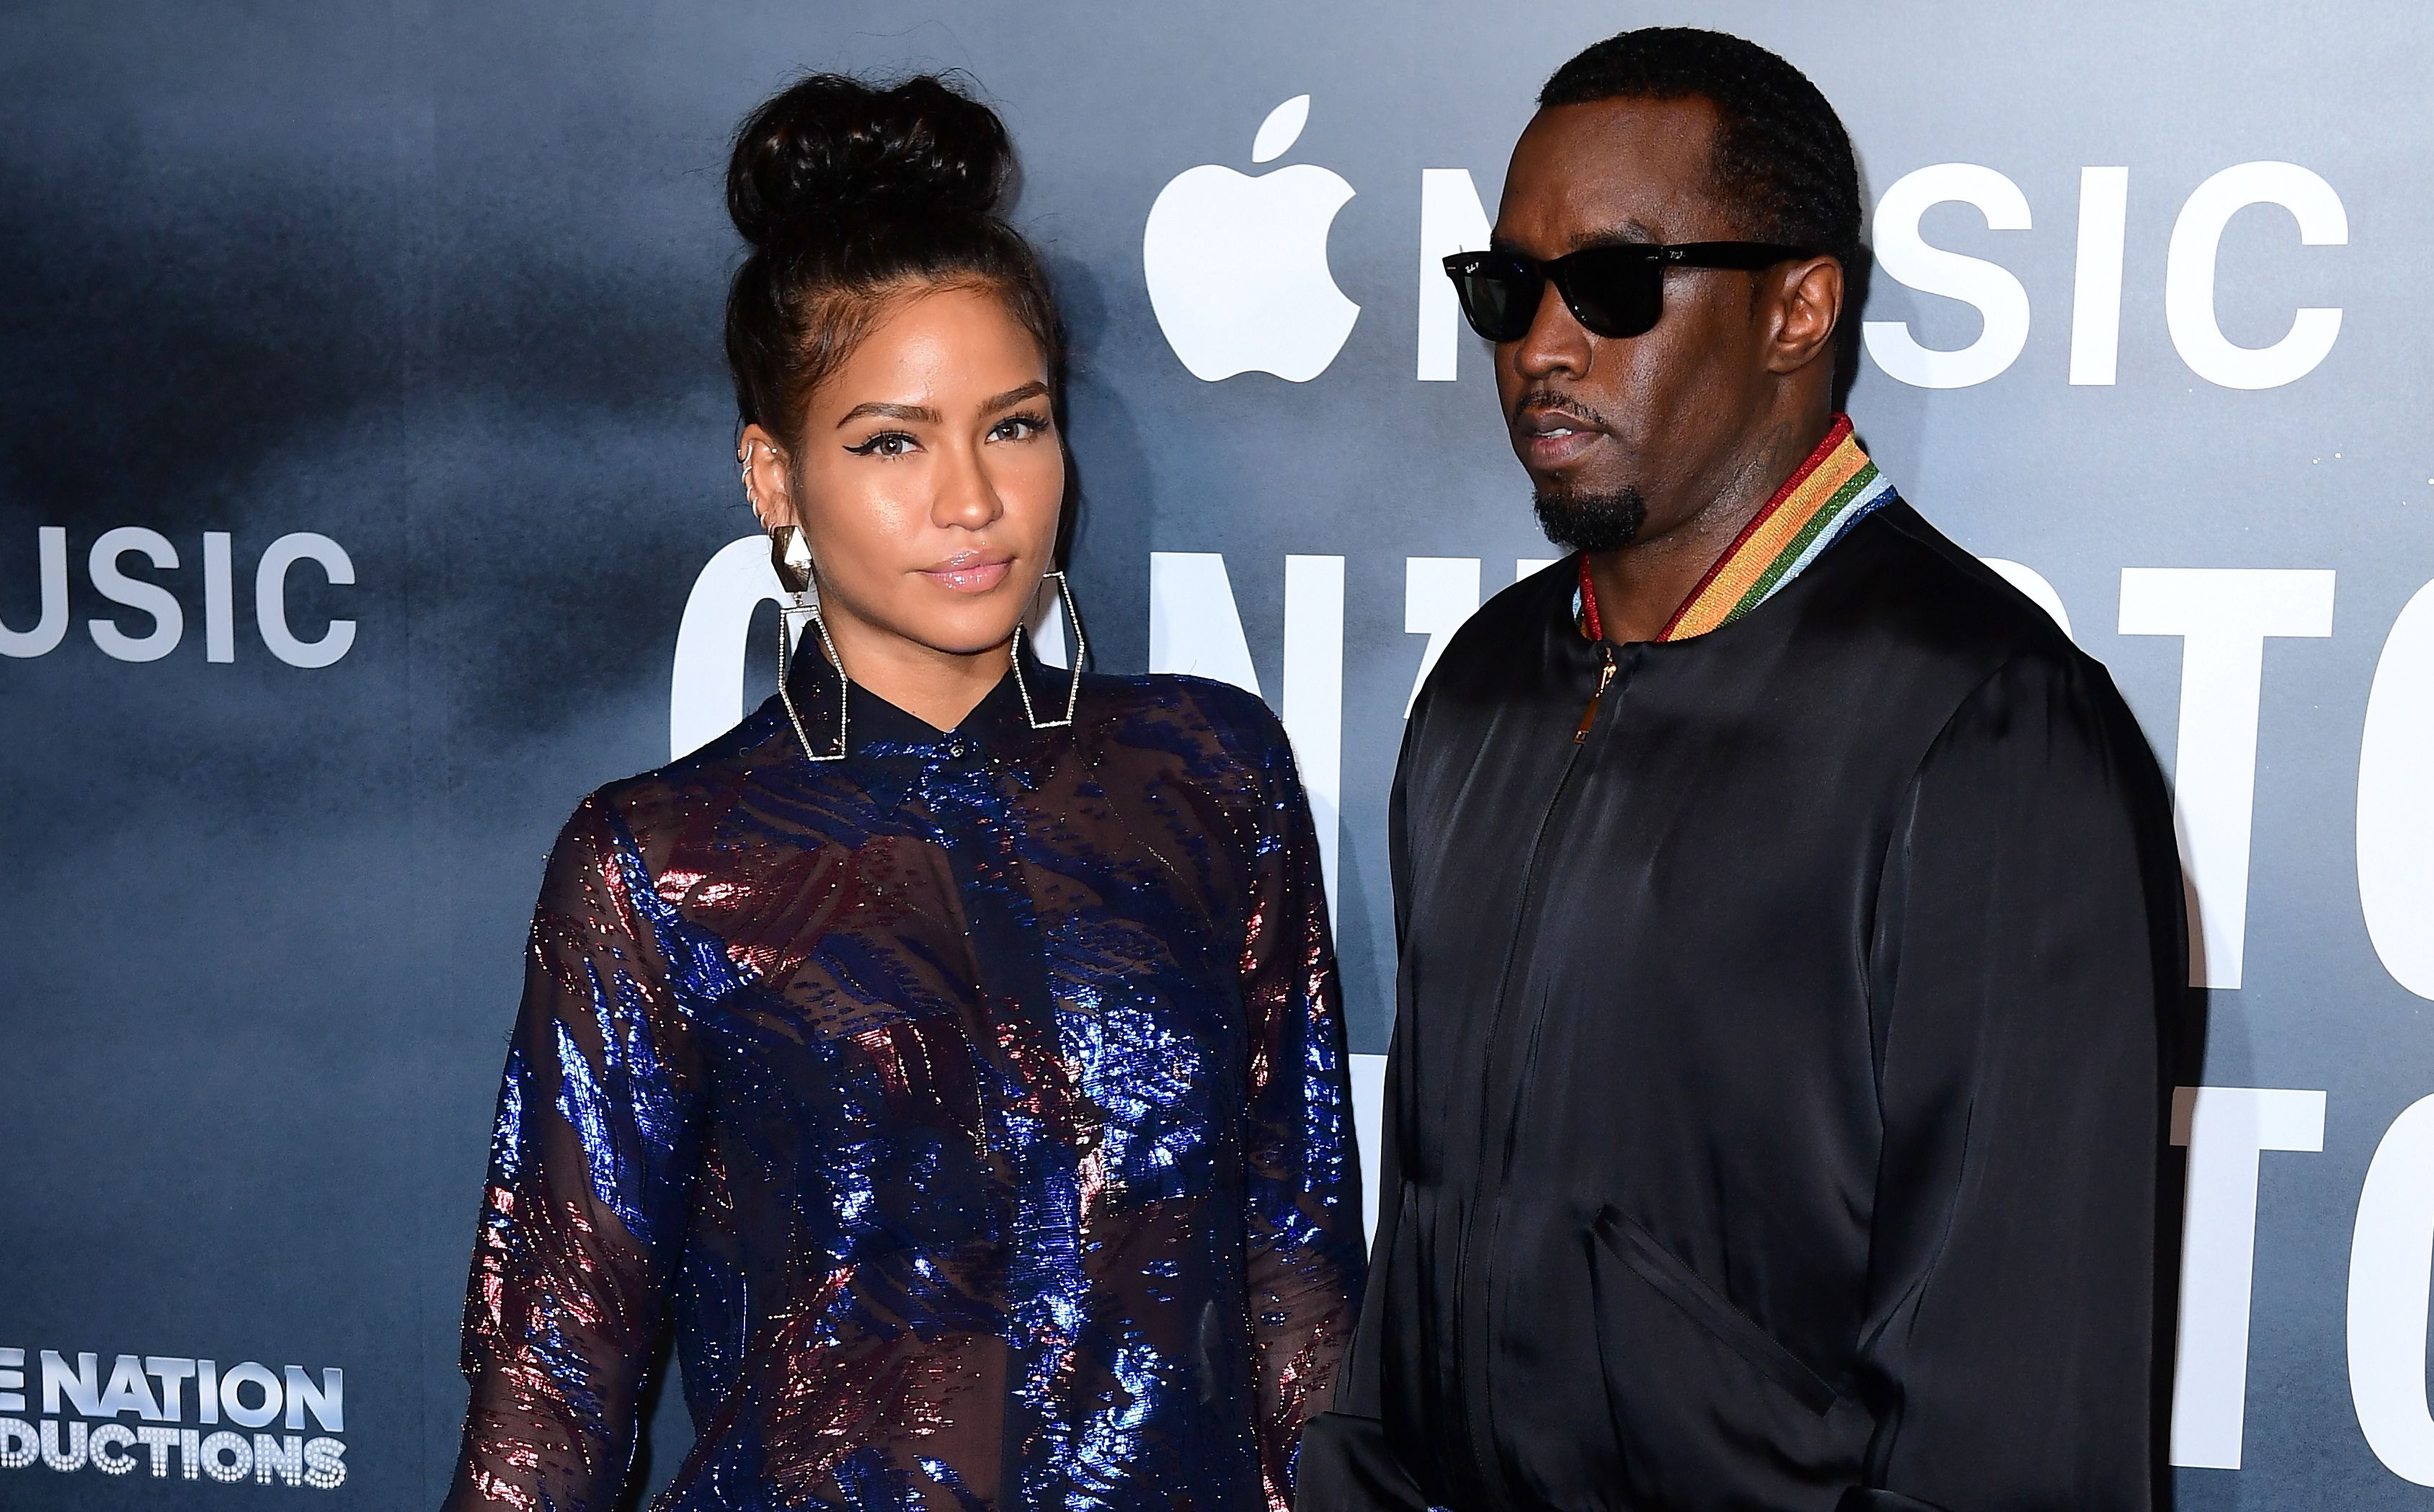 Cassie Ventura feared for her life during her relationship with Sean 